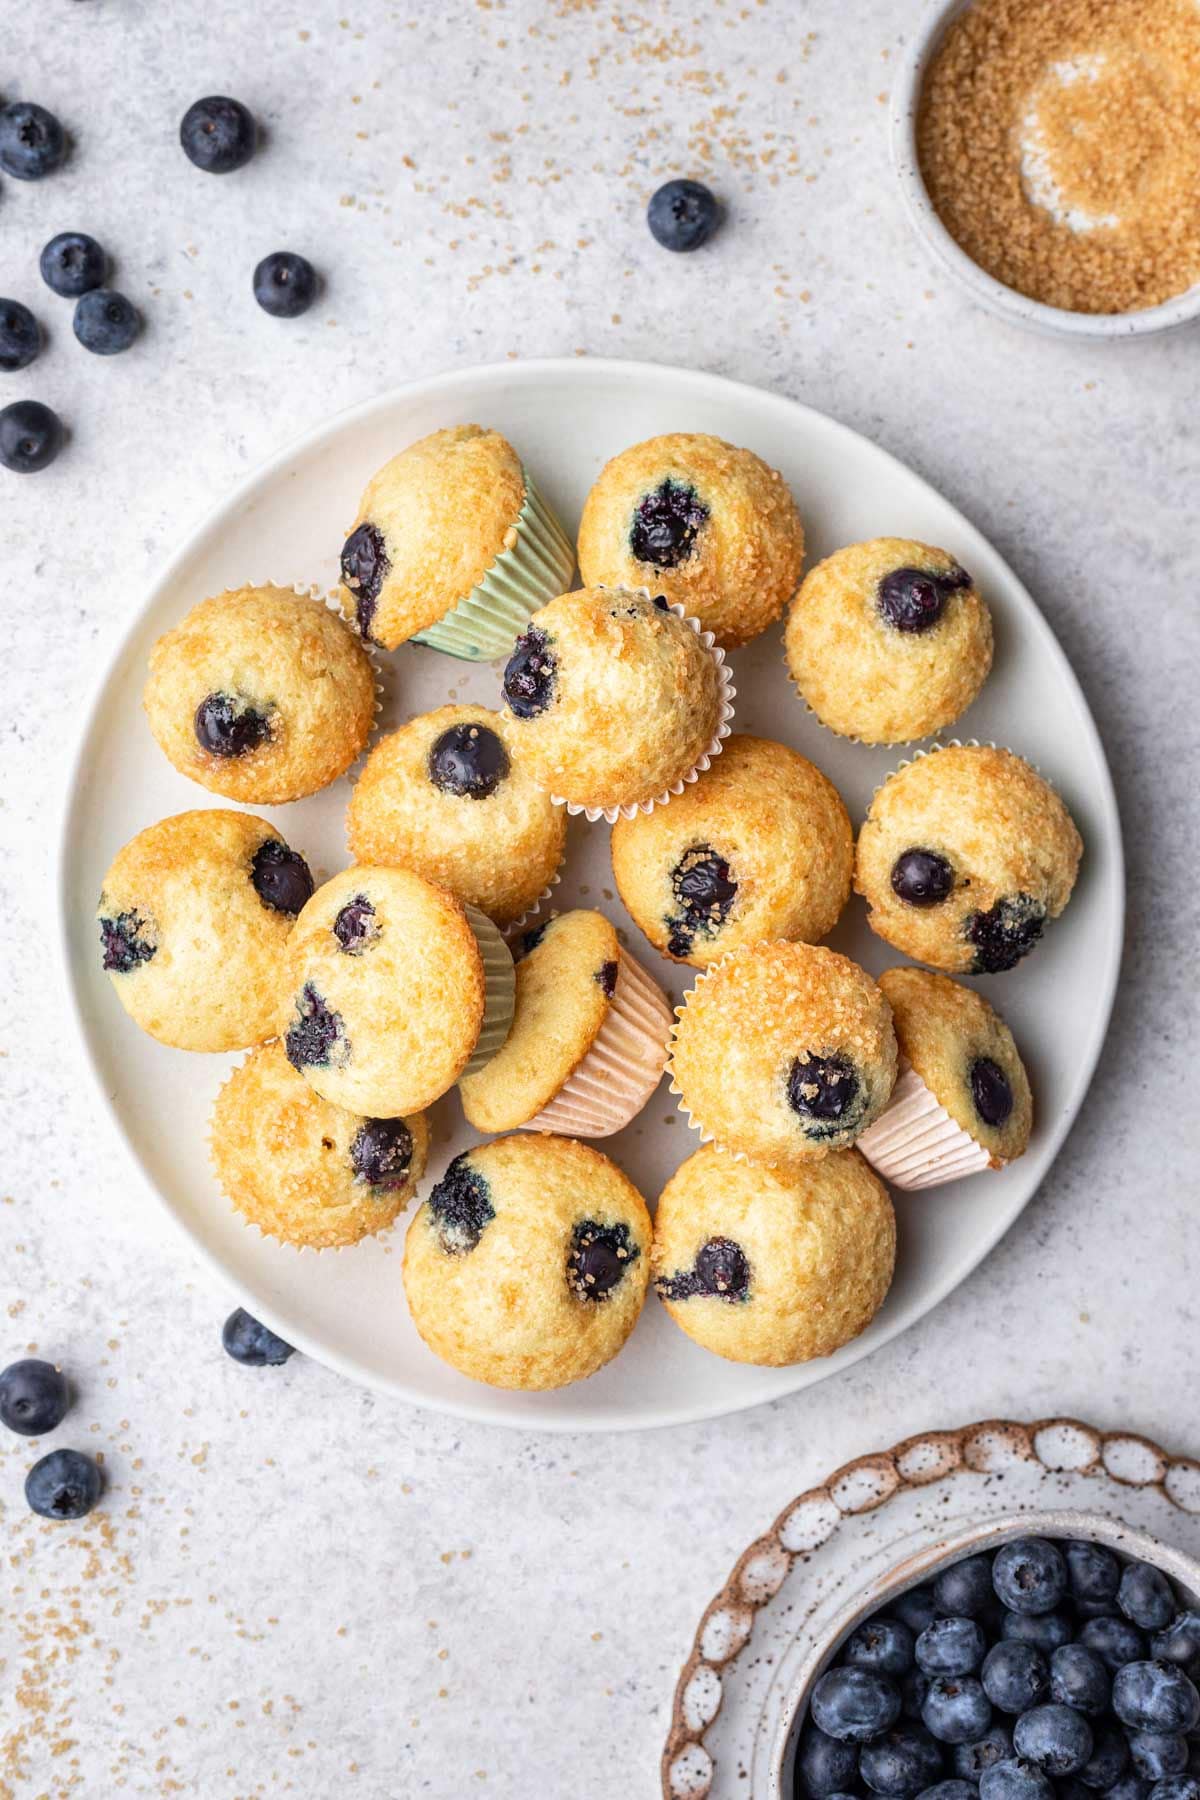 A plate of mini blueberry muffins next to scattered blueberries and a dish of sugar.